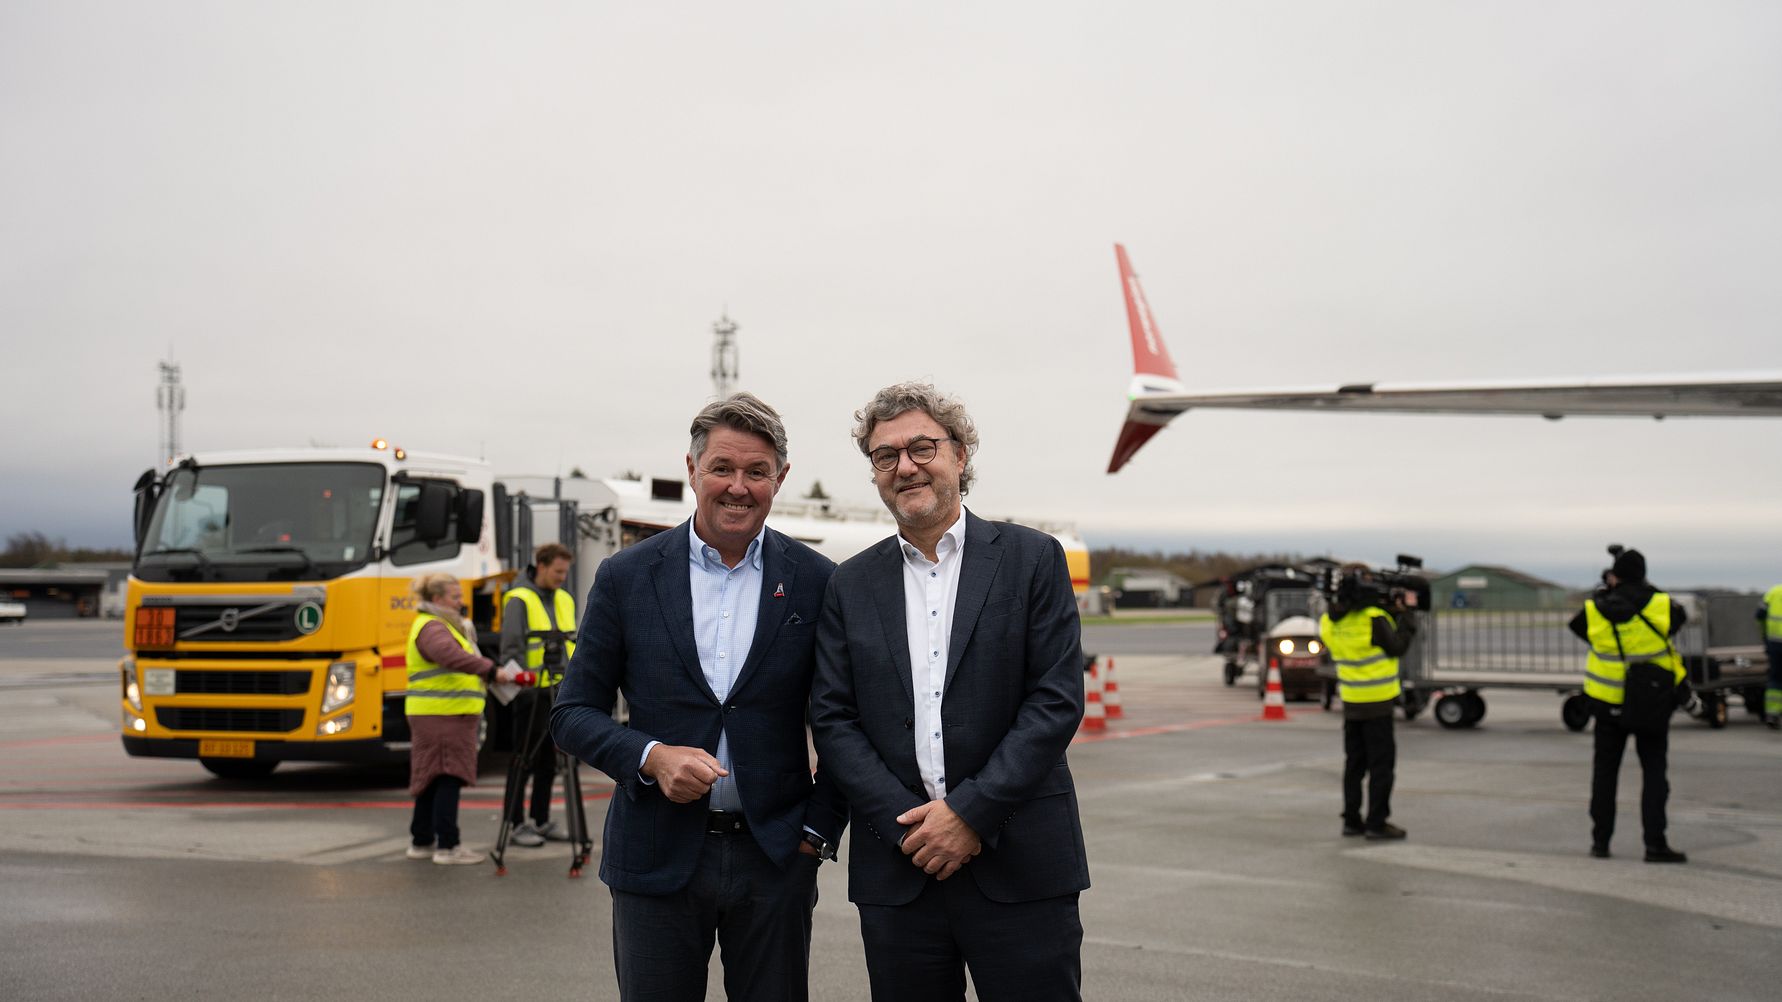 Norwegian affords fossil fuel-free aviation gasoline equal to 100 flights on Denmark’s busiest route between Aalborg and Copenhagen